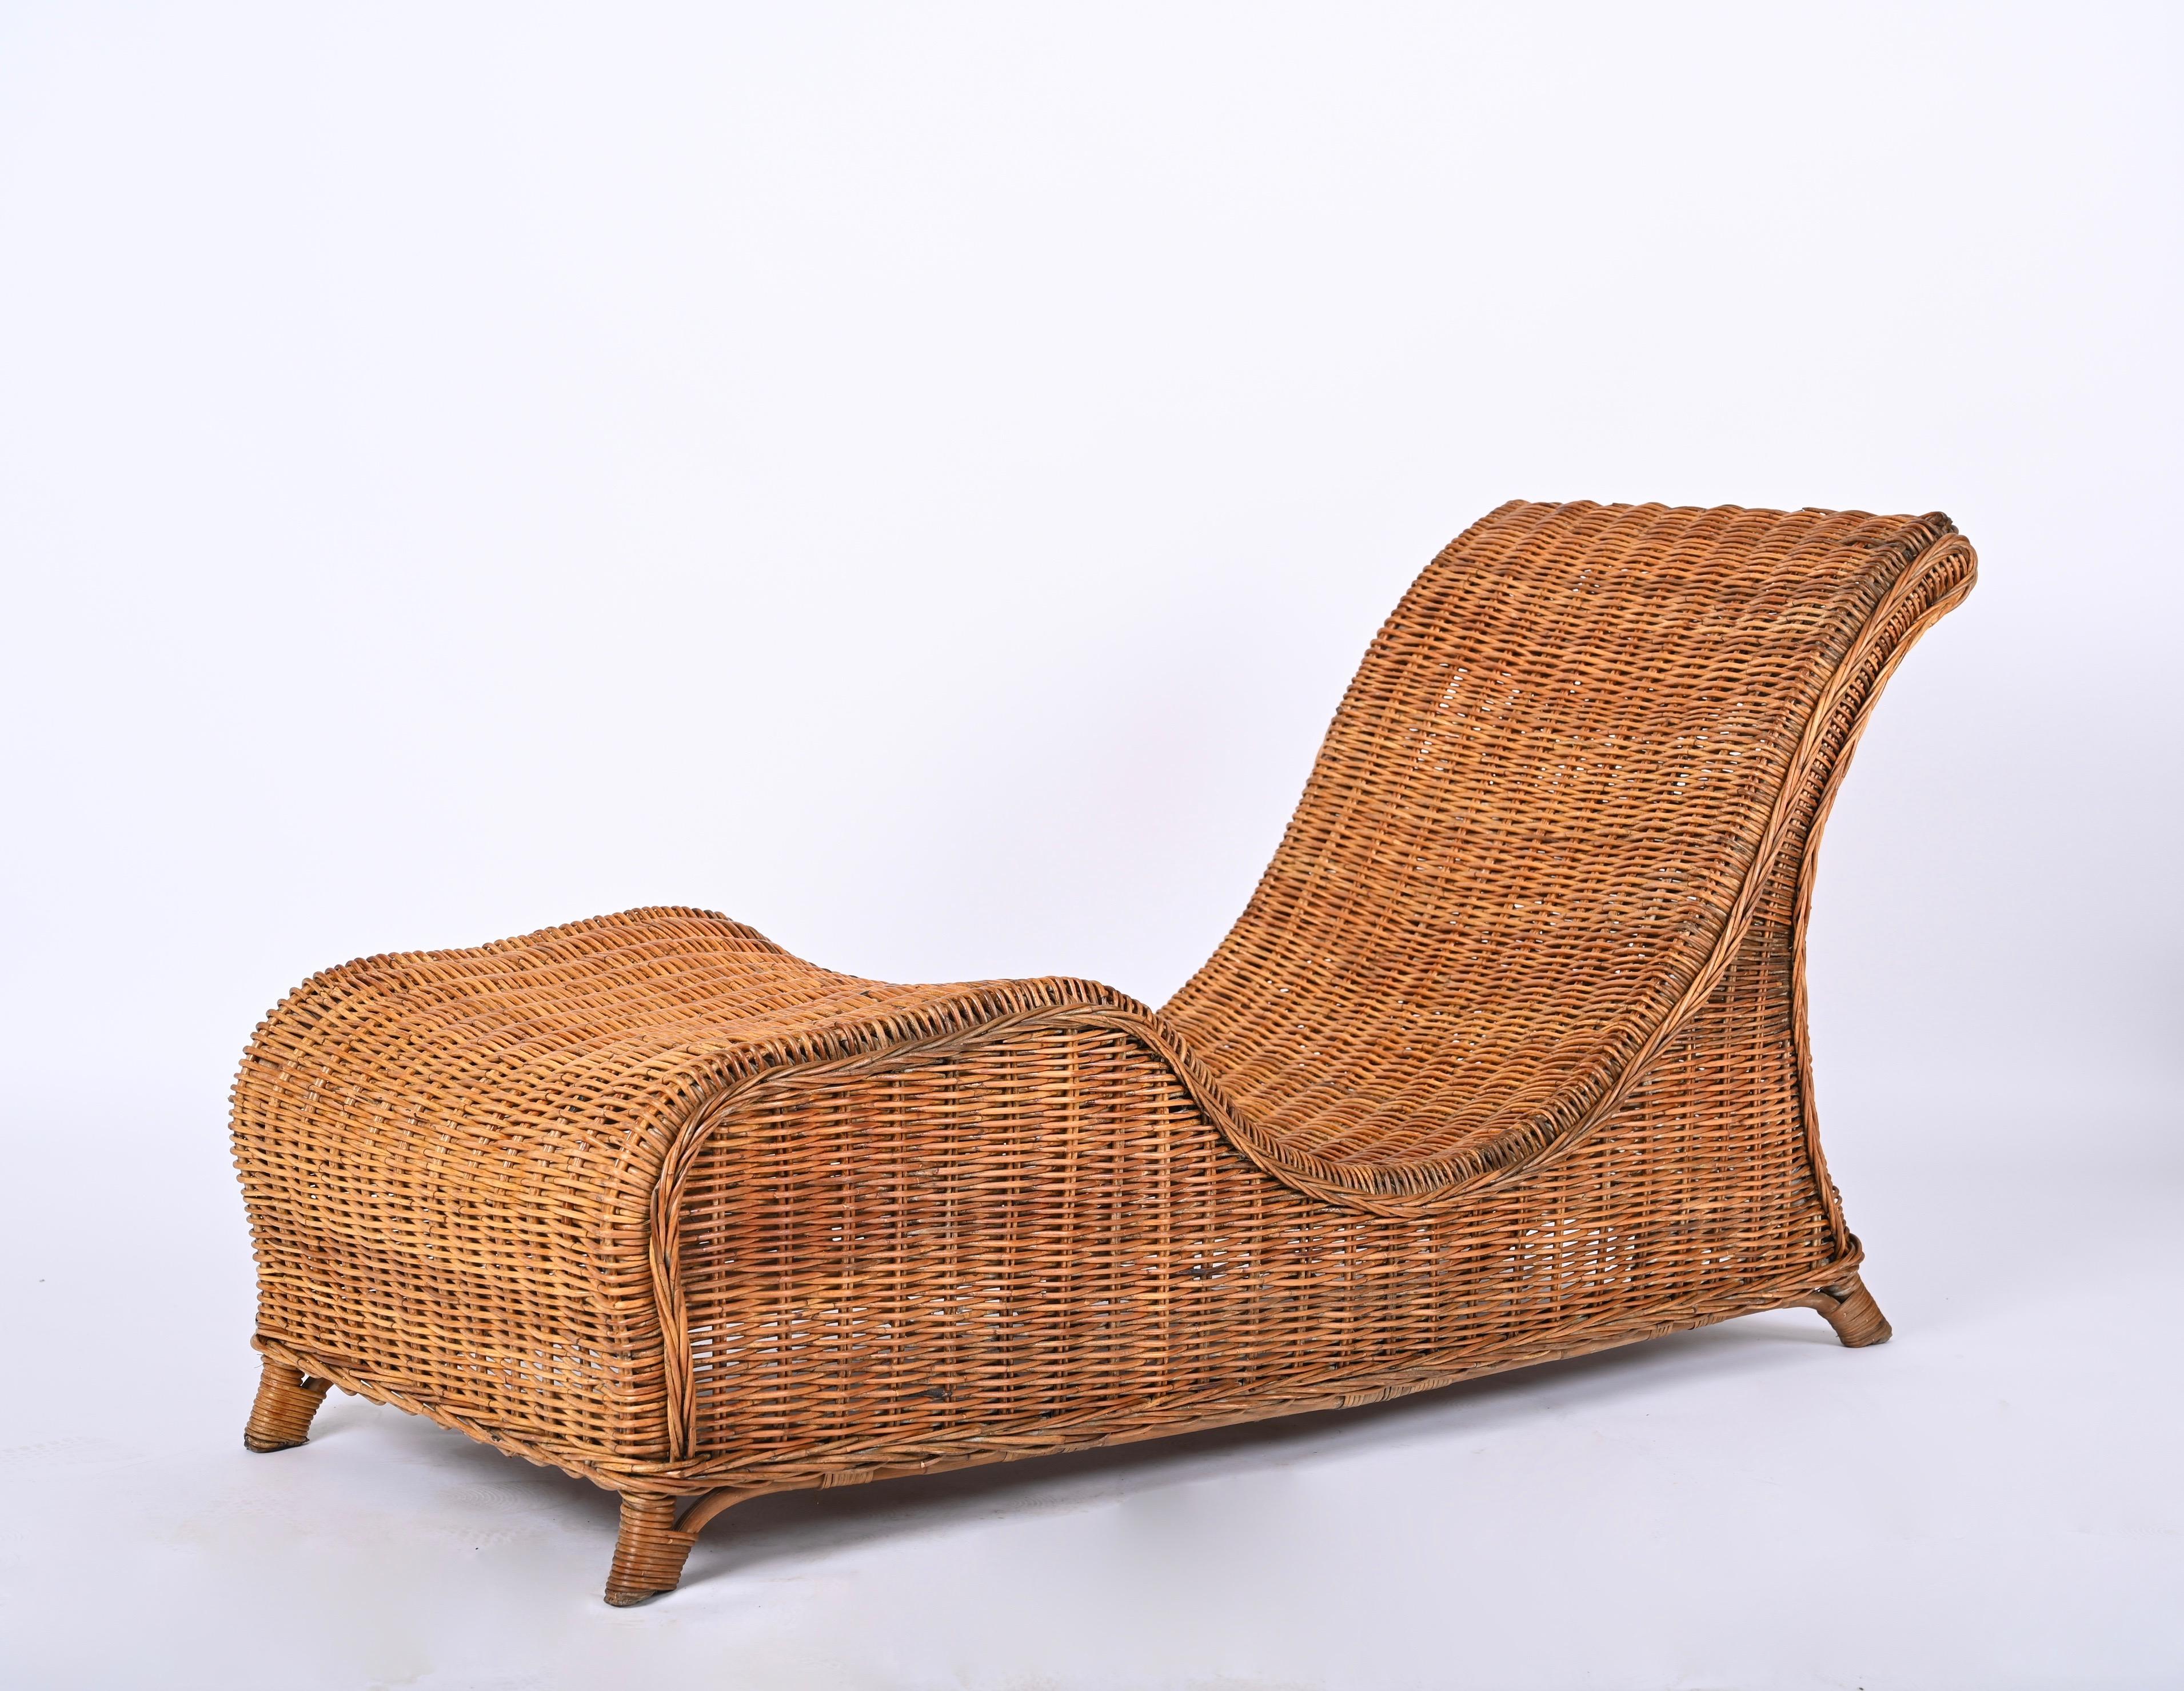 Midcentury Modern Bamboo and Wicker Italian Chaise Longue, 1960s For Sale 1